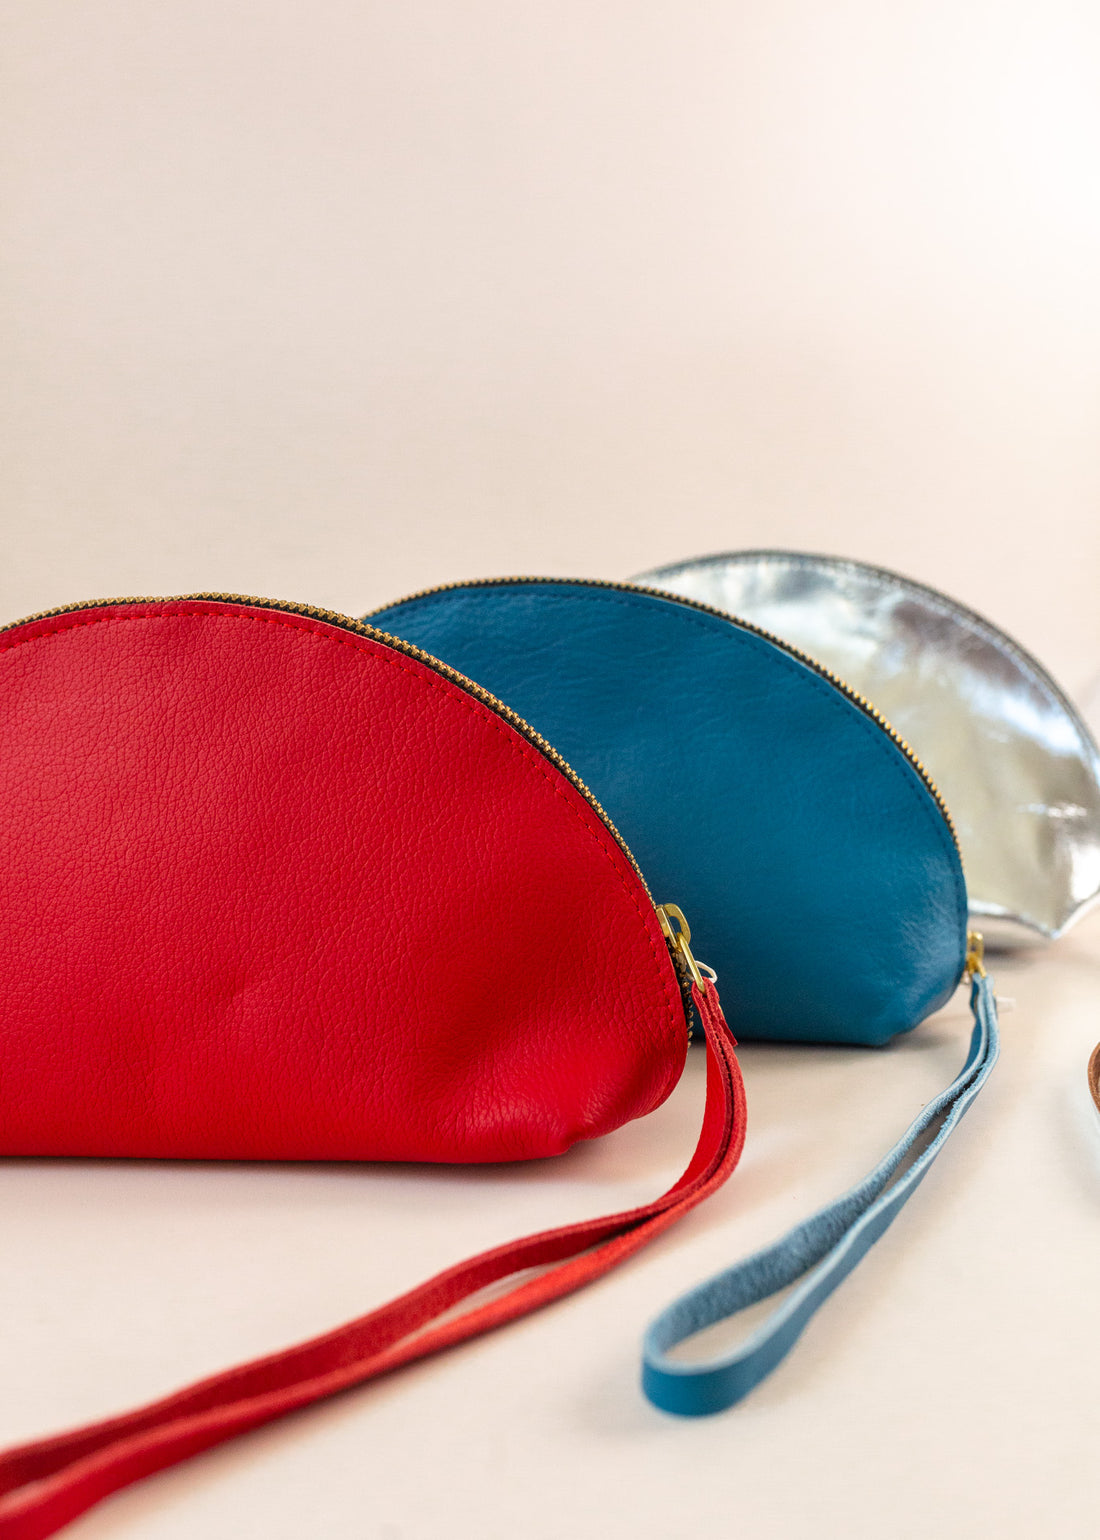 Three shell bags layered from front to back in red, blue and silver